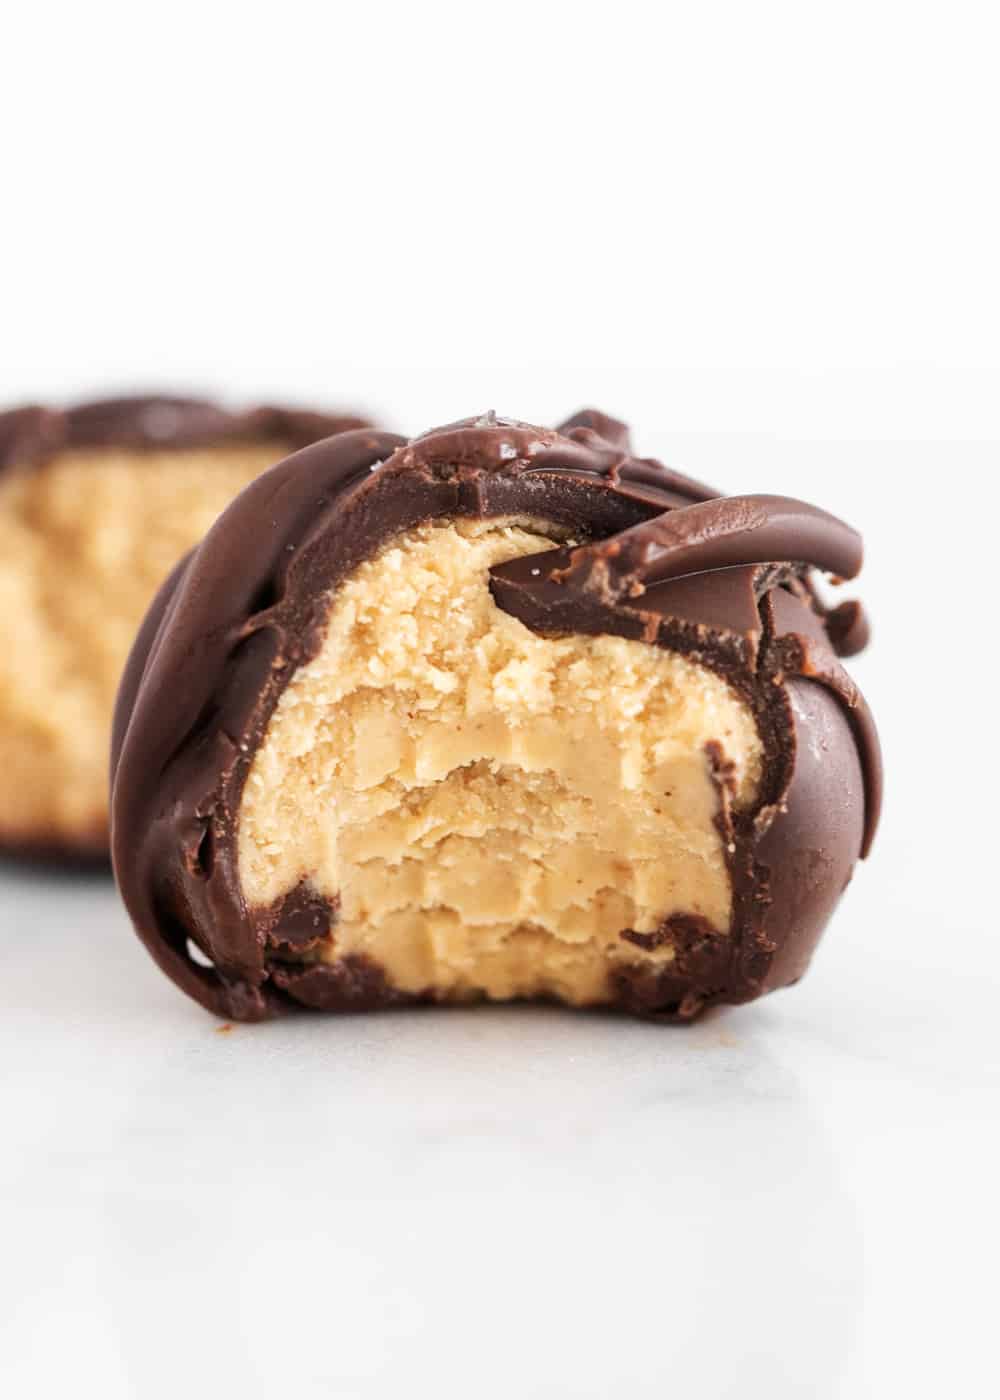 Chocolate peanut butter ball with a bite taken.